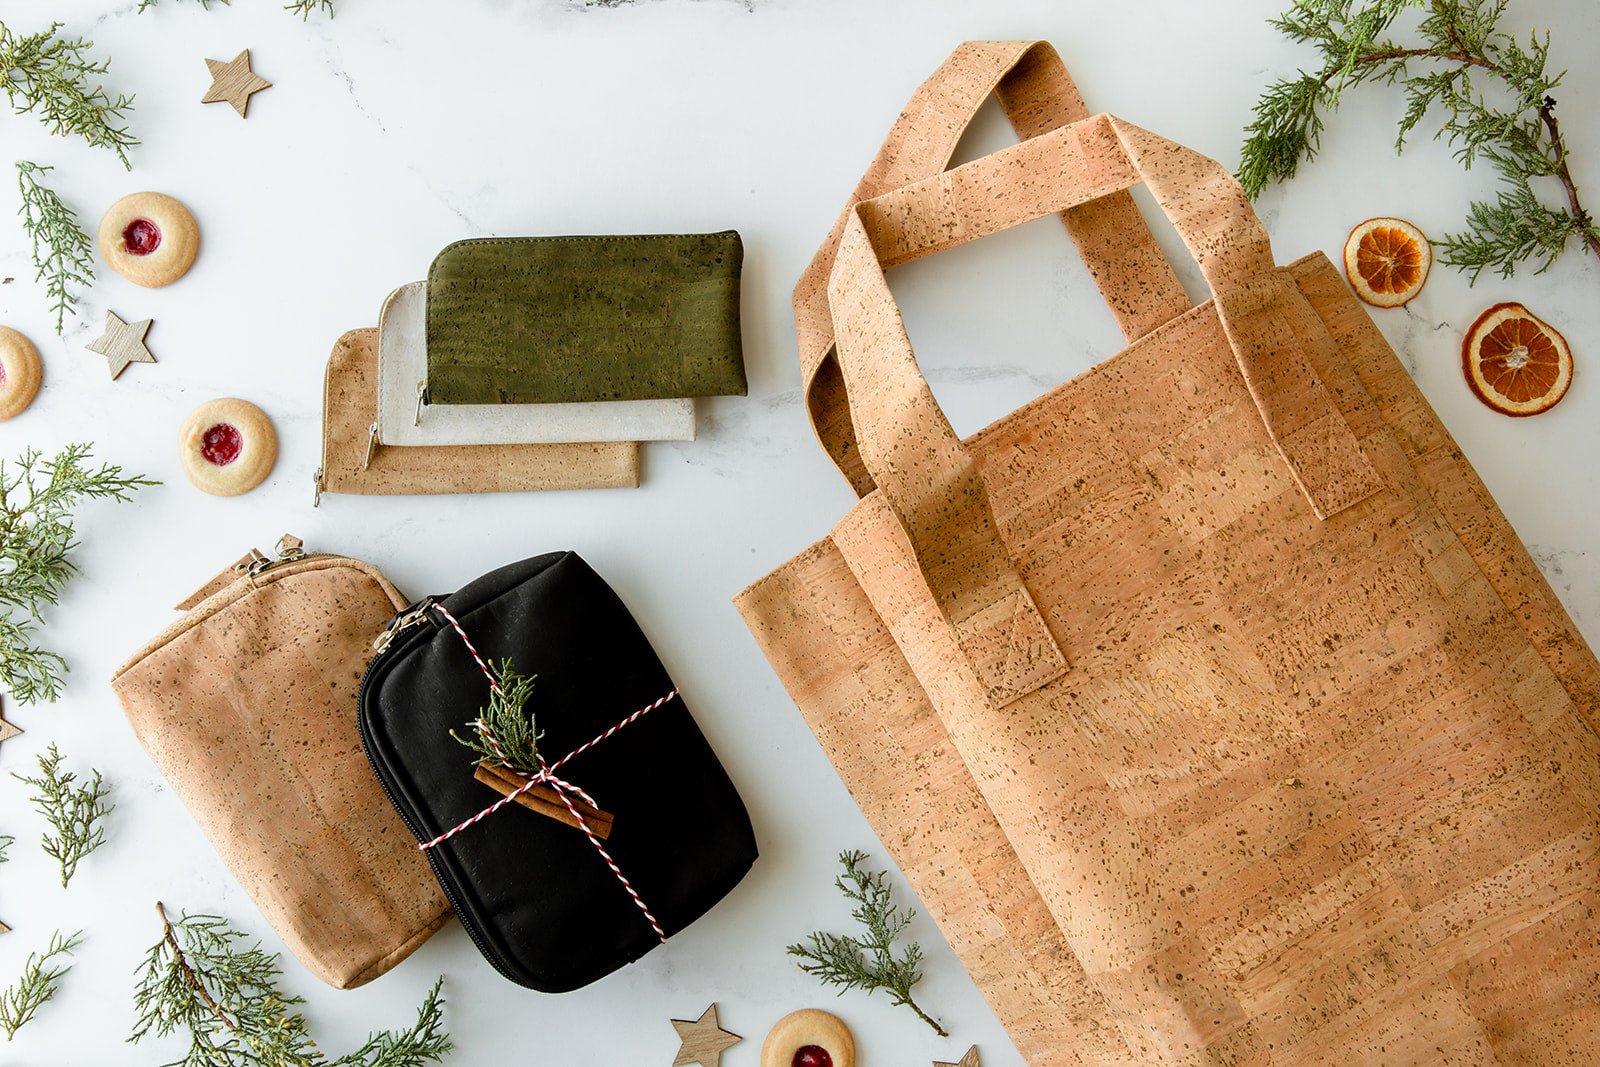 Plastic-free and Eco friendly Accessories & Clothing made out of cork, wood and other sustainable materials - Earth Ahead